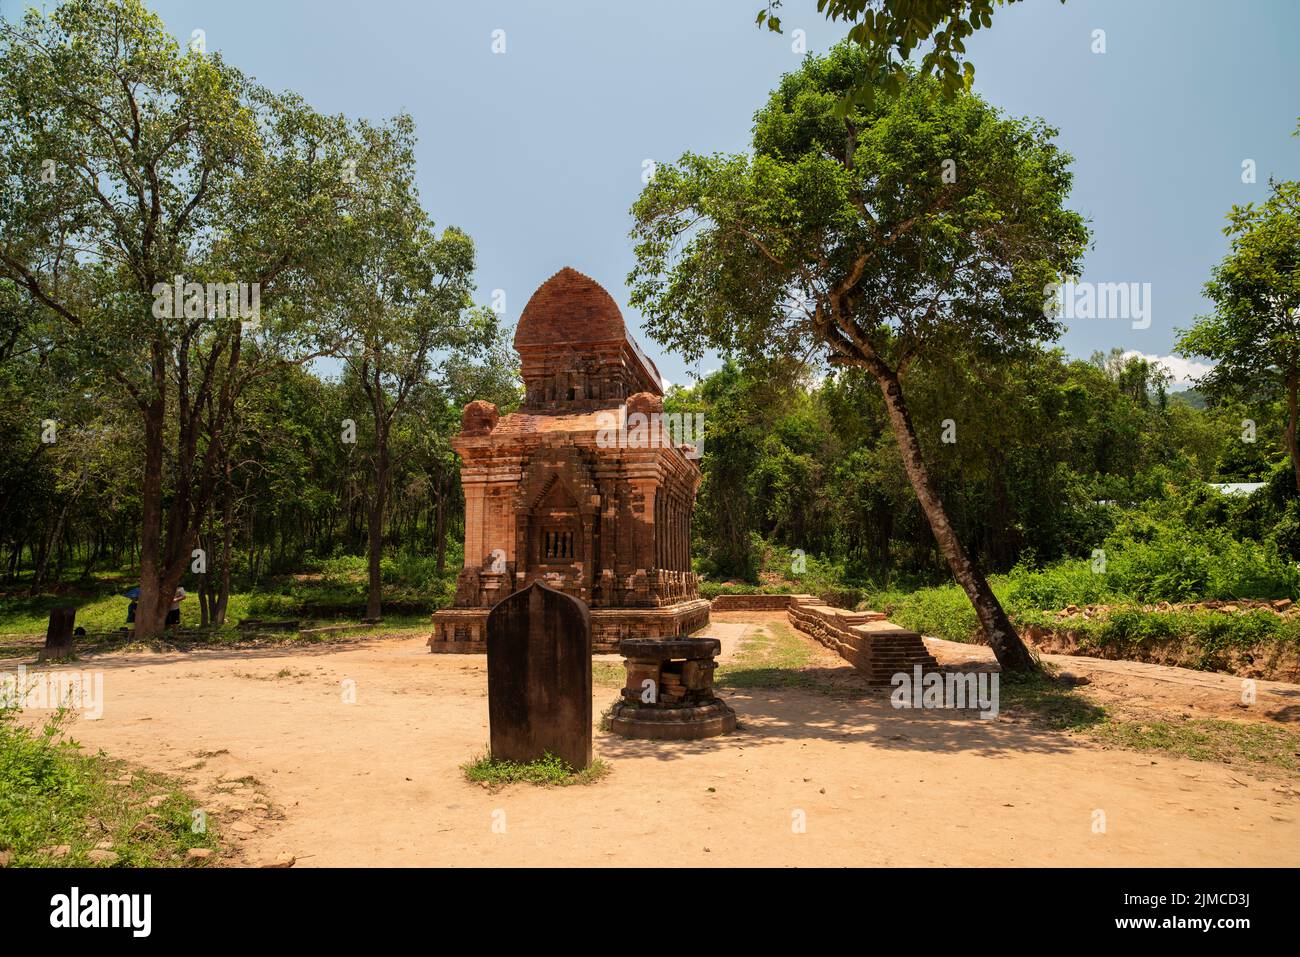 My Son UNESCO World Heritage site near Hoi An in central Vietnam is an ancient Hindu temple complex of the Cham people. Ruins of Old hindu temple Stock Photo